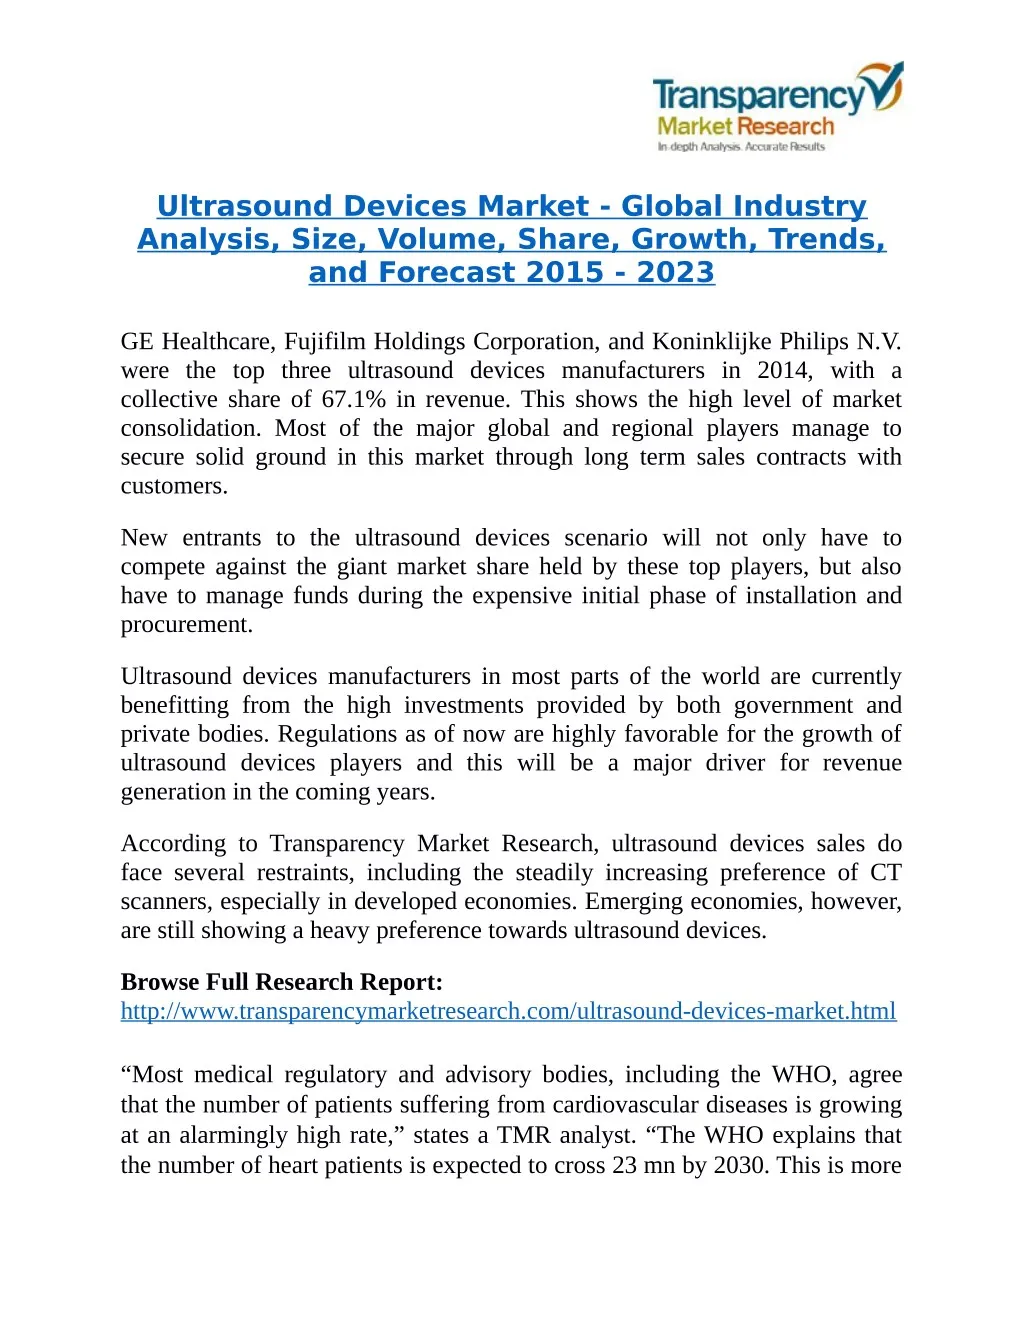 ultrasound devices market global industry